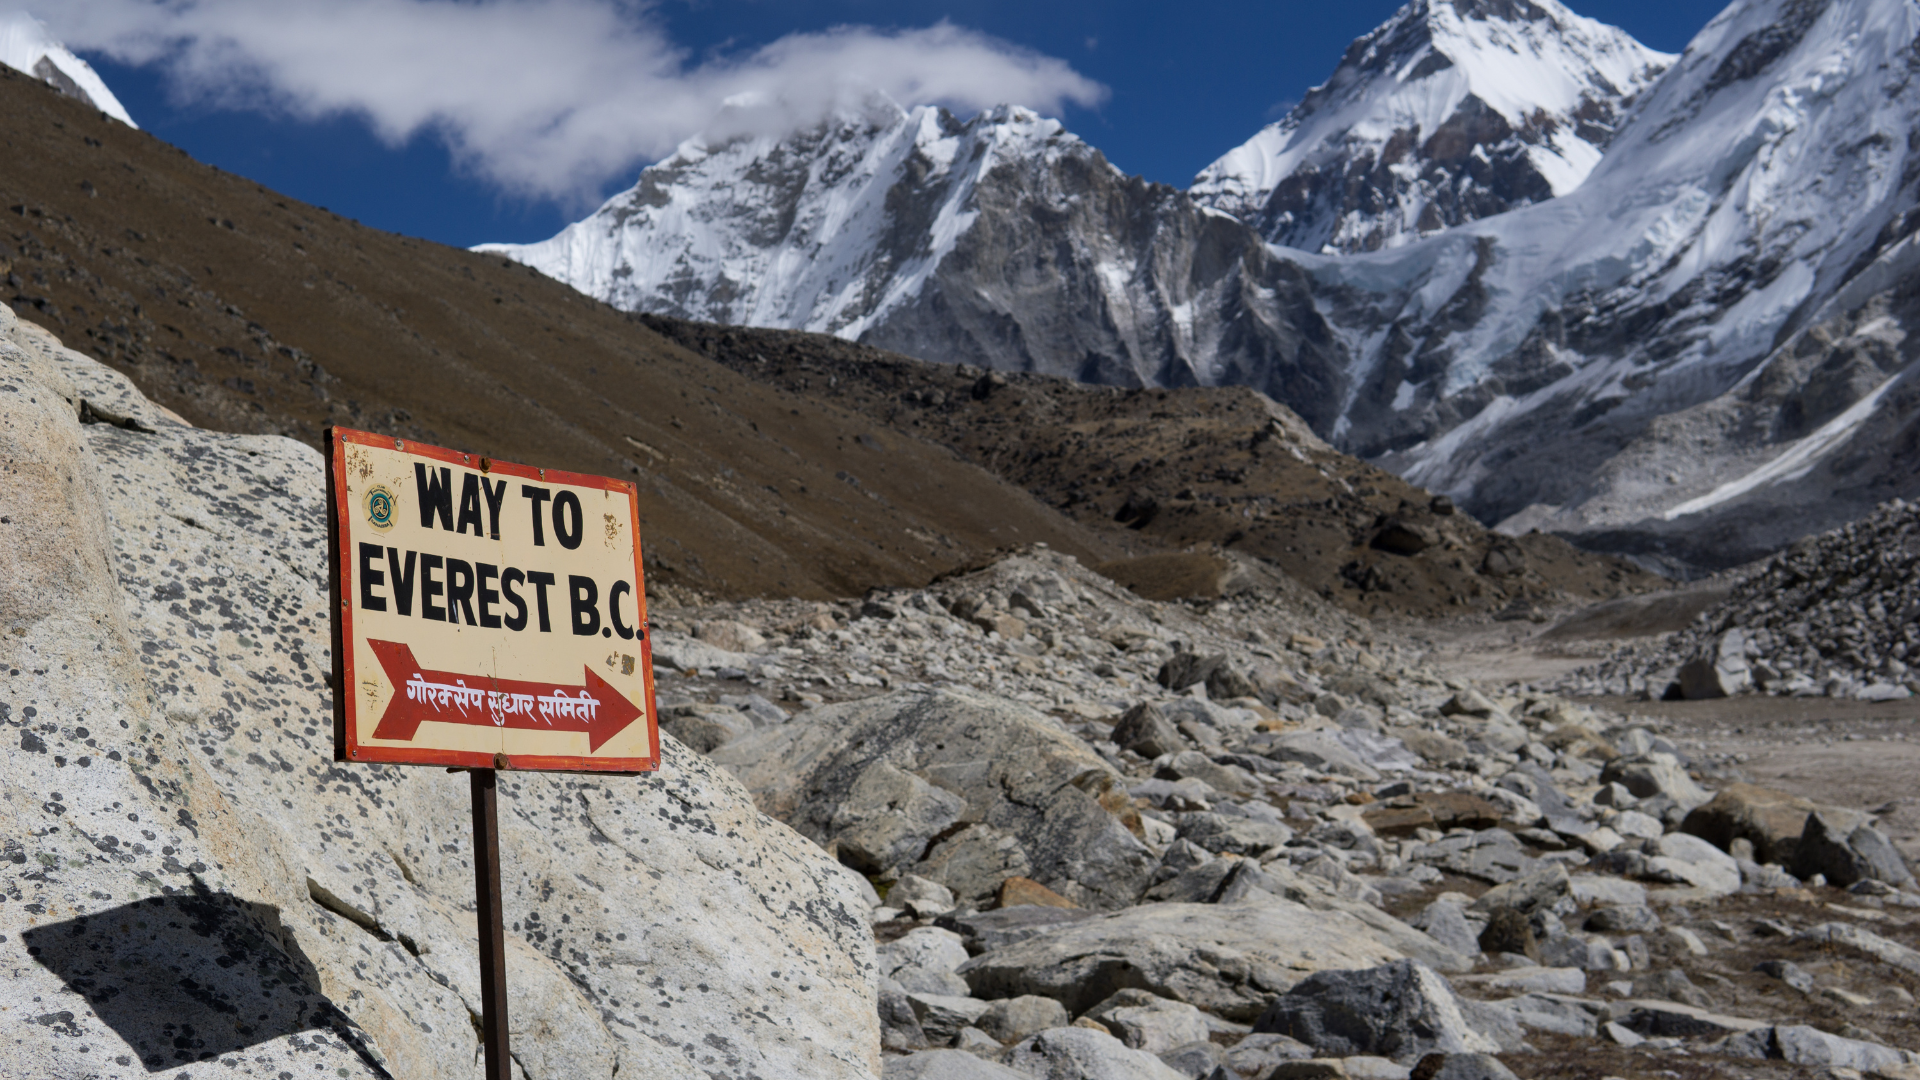 Tips to Prepare for the trek to Everest Basecamp